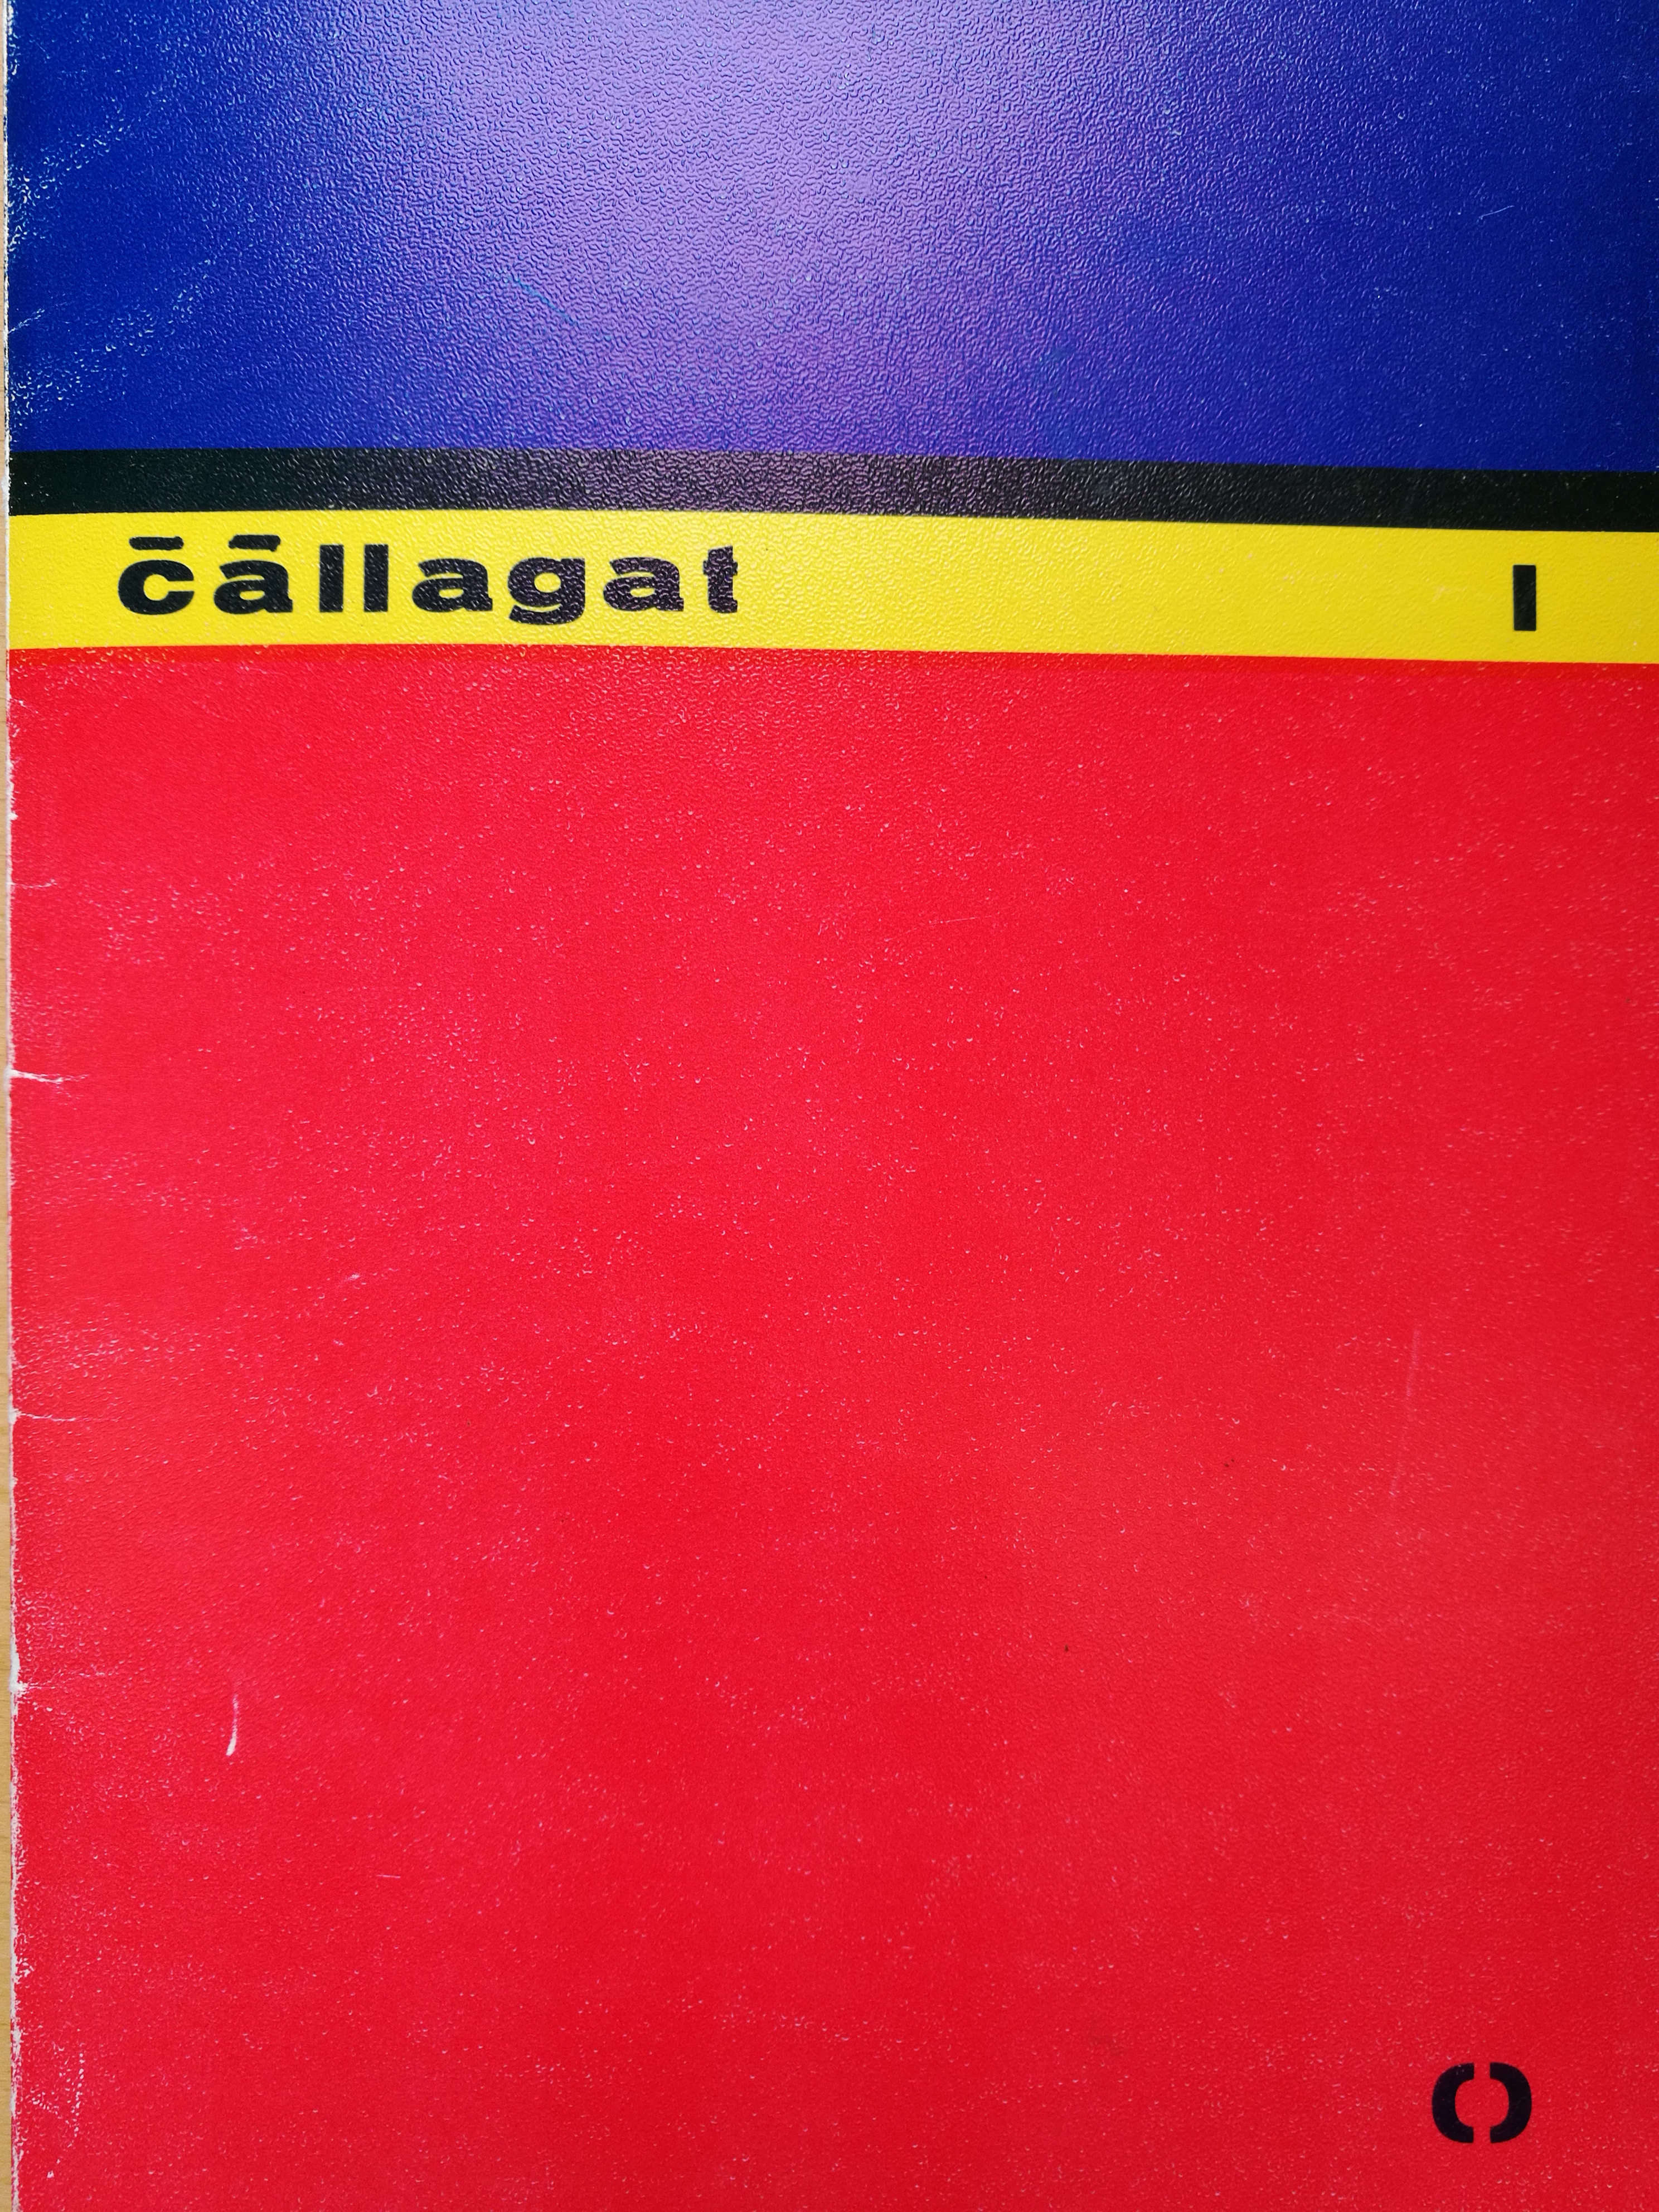 Modest blue, yellow and red book cover.